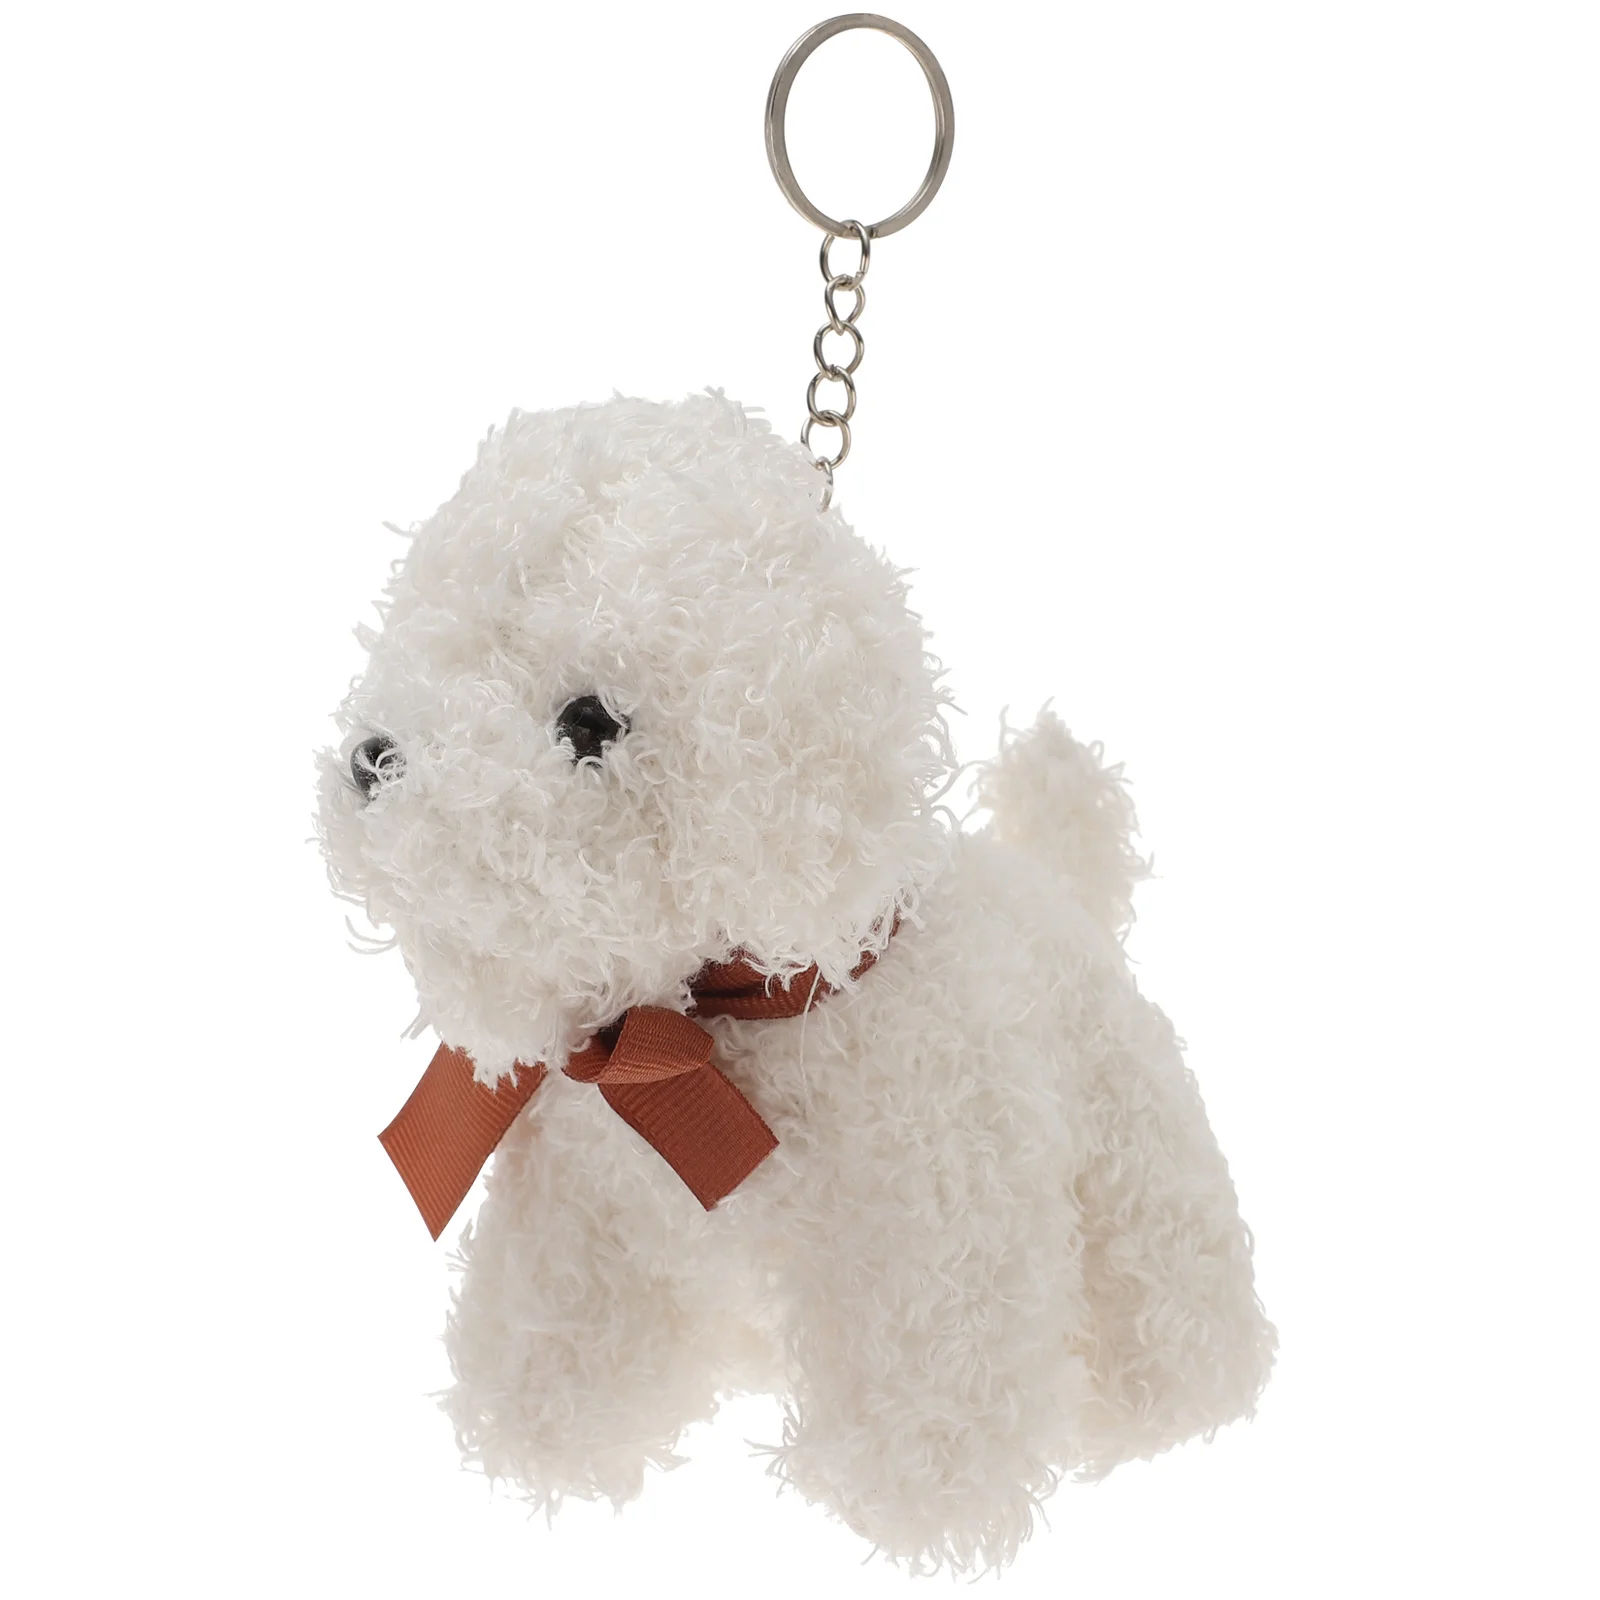 Dog Toy Keychain Ring Backpack Plush for Boys Animal Keychains Golden Retriever Rings wuta o ring round carabiner for keychain key fob clasp connector rings for keychains clip strap buckle snap hook bag accessories